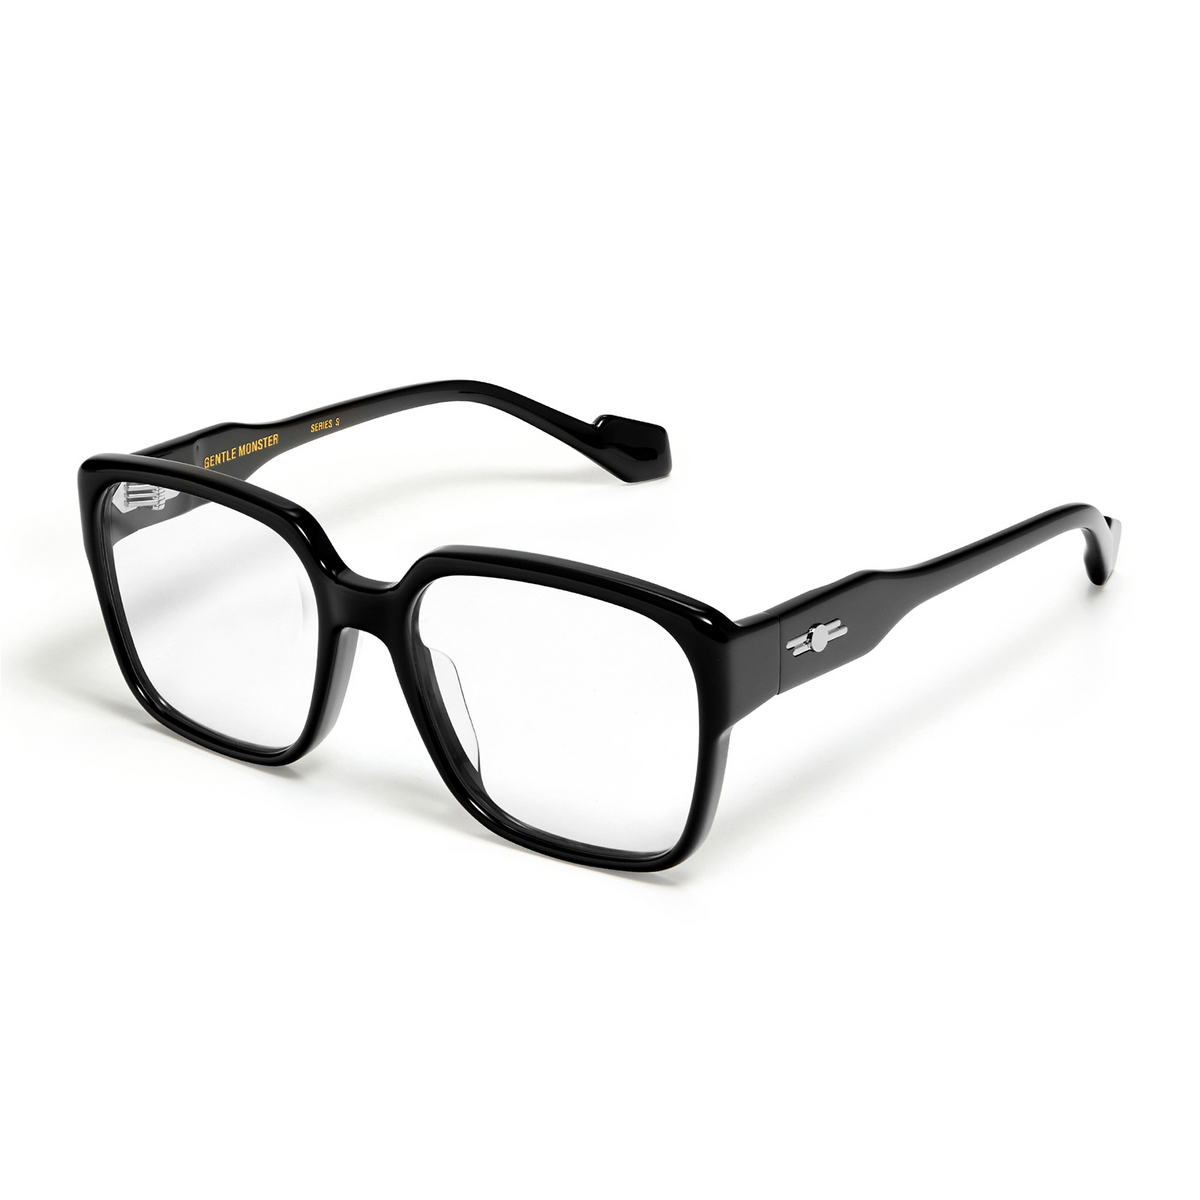 Gentle Monster® Square Eyeglasses: Loopy color 01 Black - three-quarters view